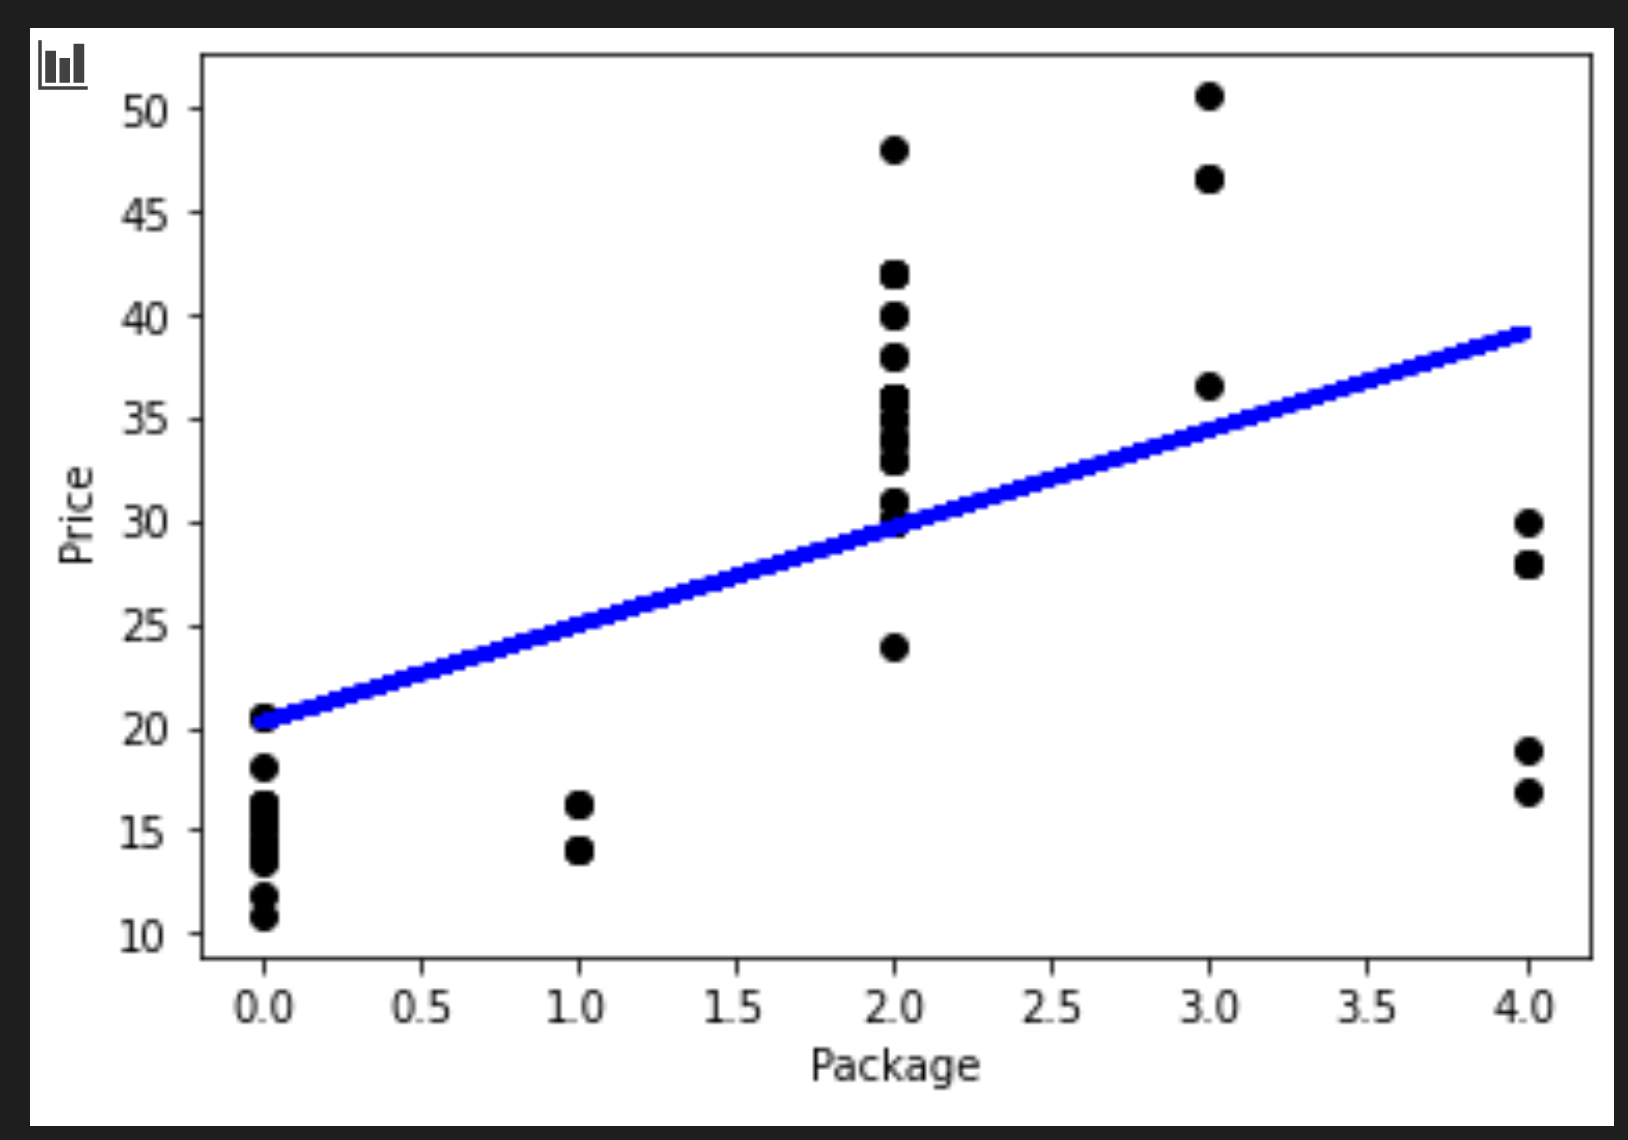 A scatterplot showing package to price relationship